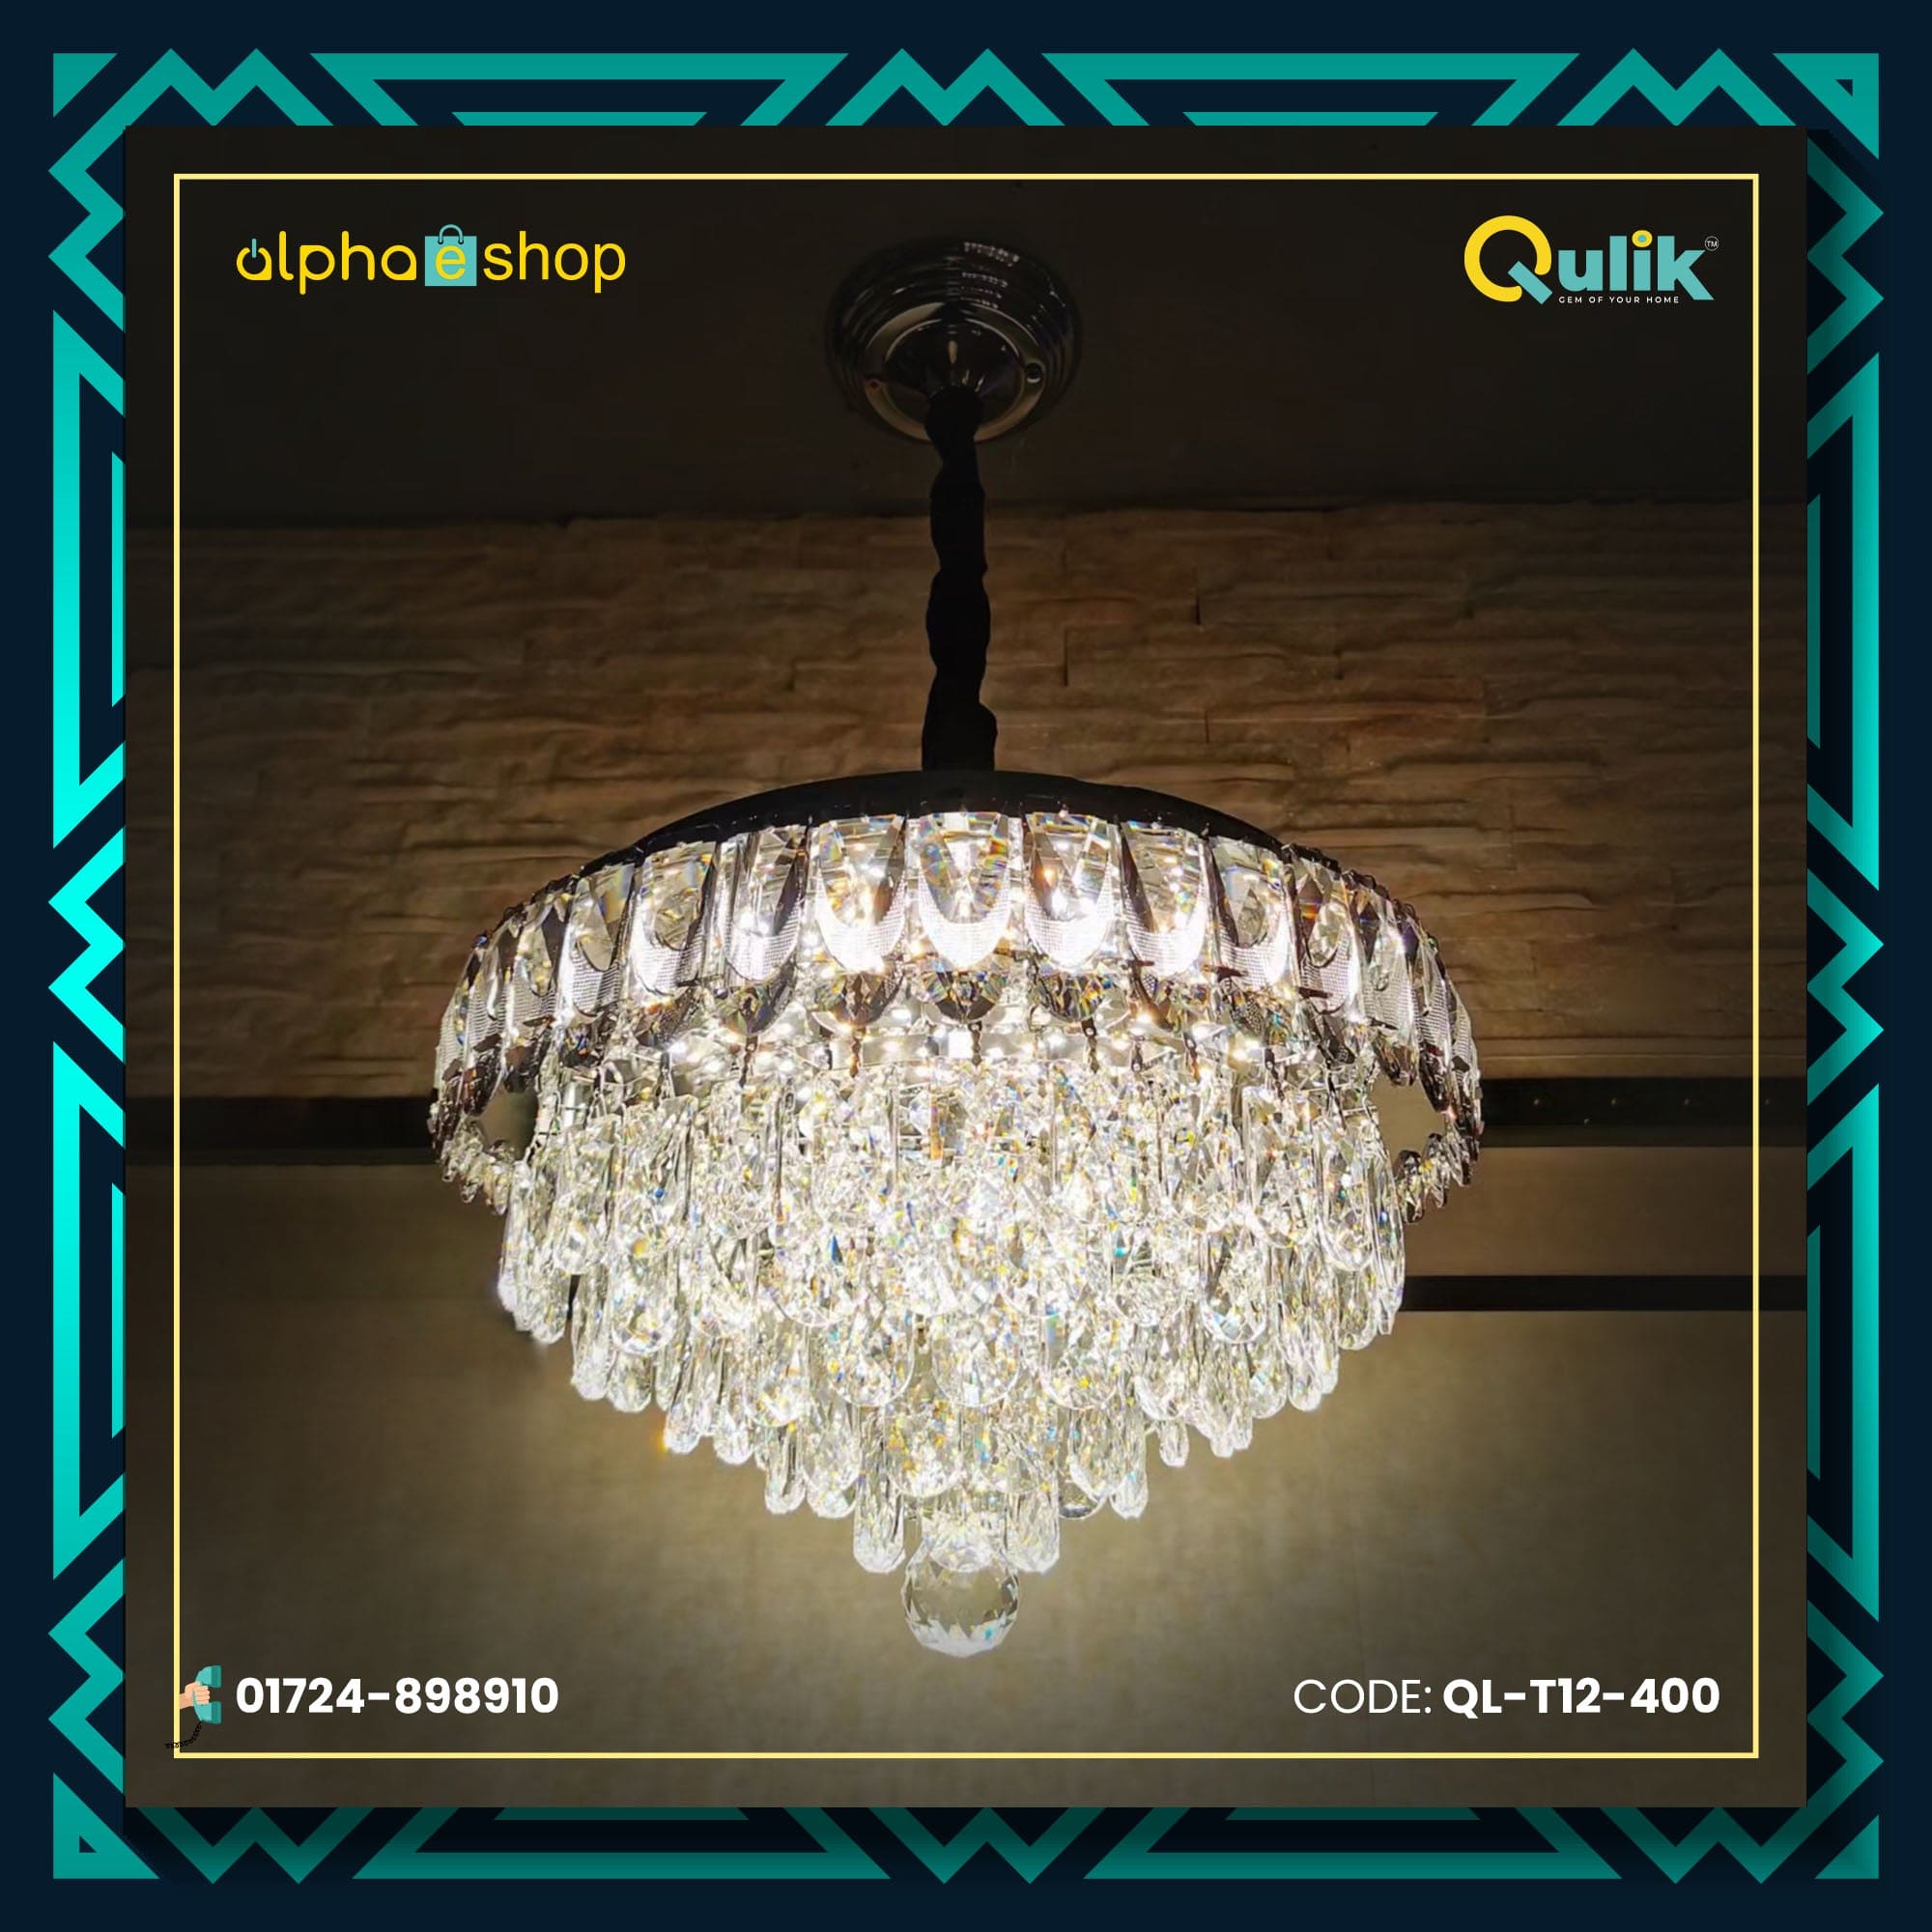 Qulik T12-500 Modern Crystal Chandelier 6-Layer LED Ceiling Light. Versatile design with acrylic, crystal, and iron construction. Adjustable color temperature - Warm, White, Daylight. 60W power, 2-year warranty.